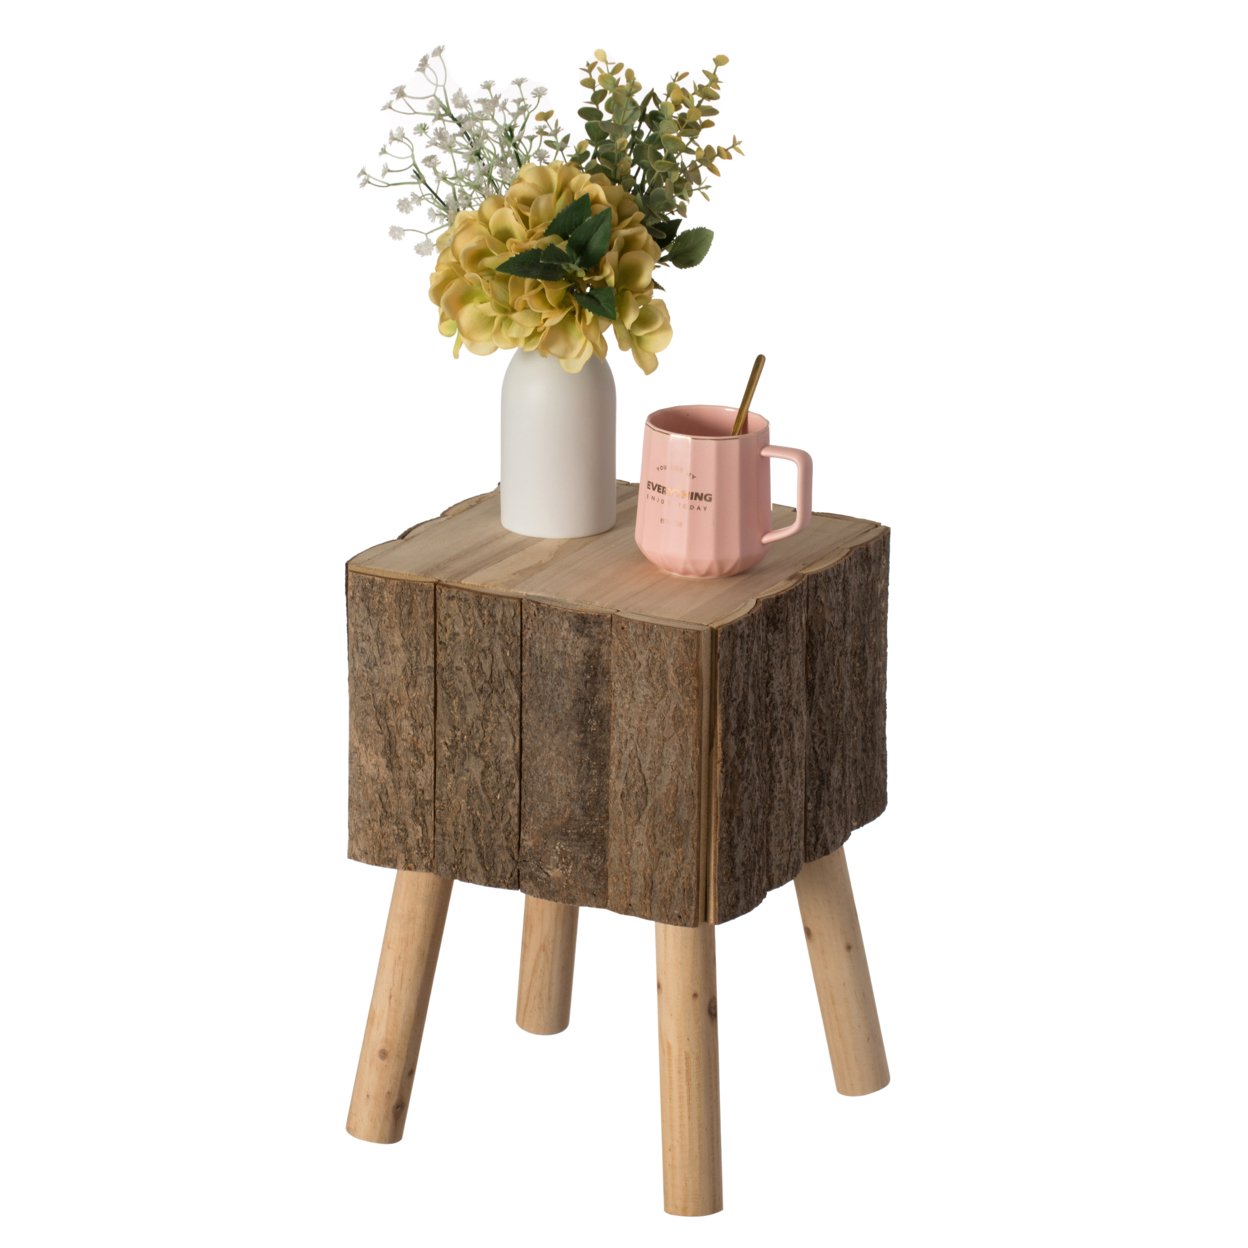 Vintiquewise Decorative Natural Wooden Log Box Shaped Side Table for Indoor and Outdoor